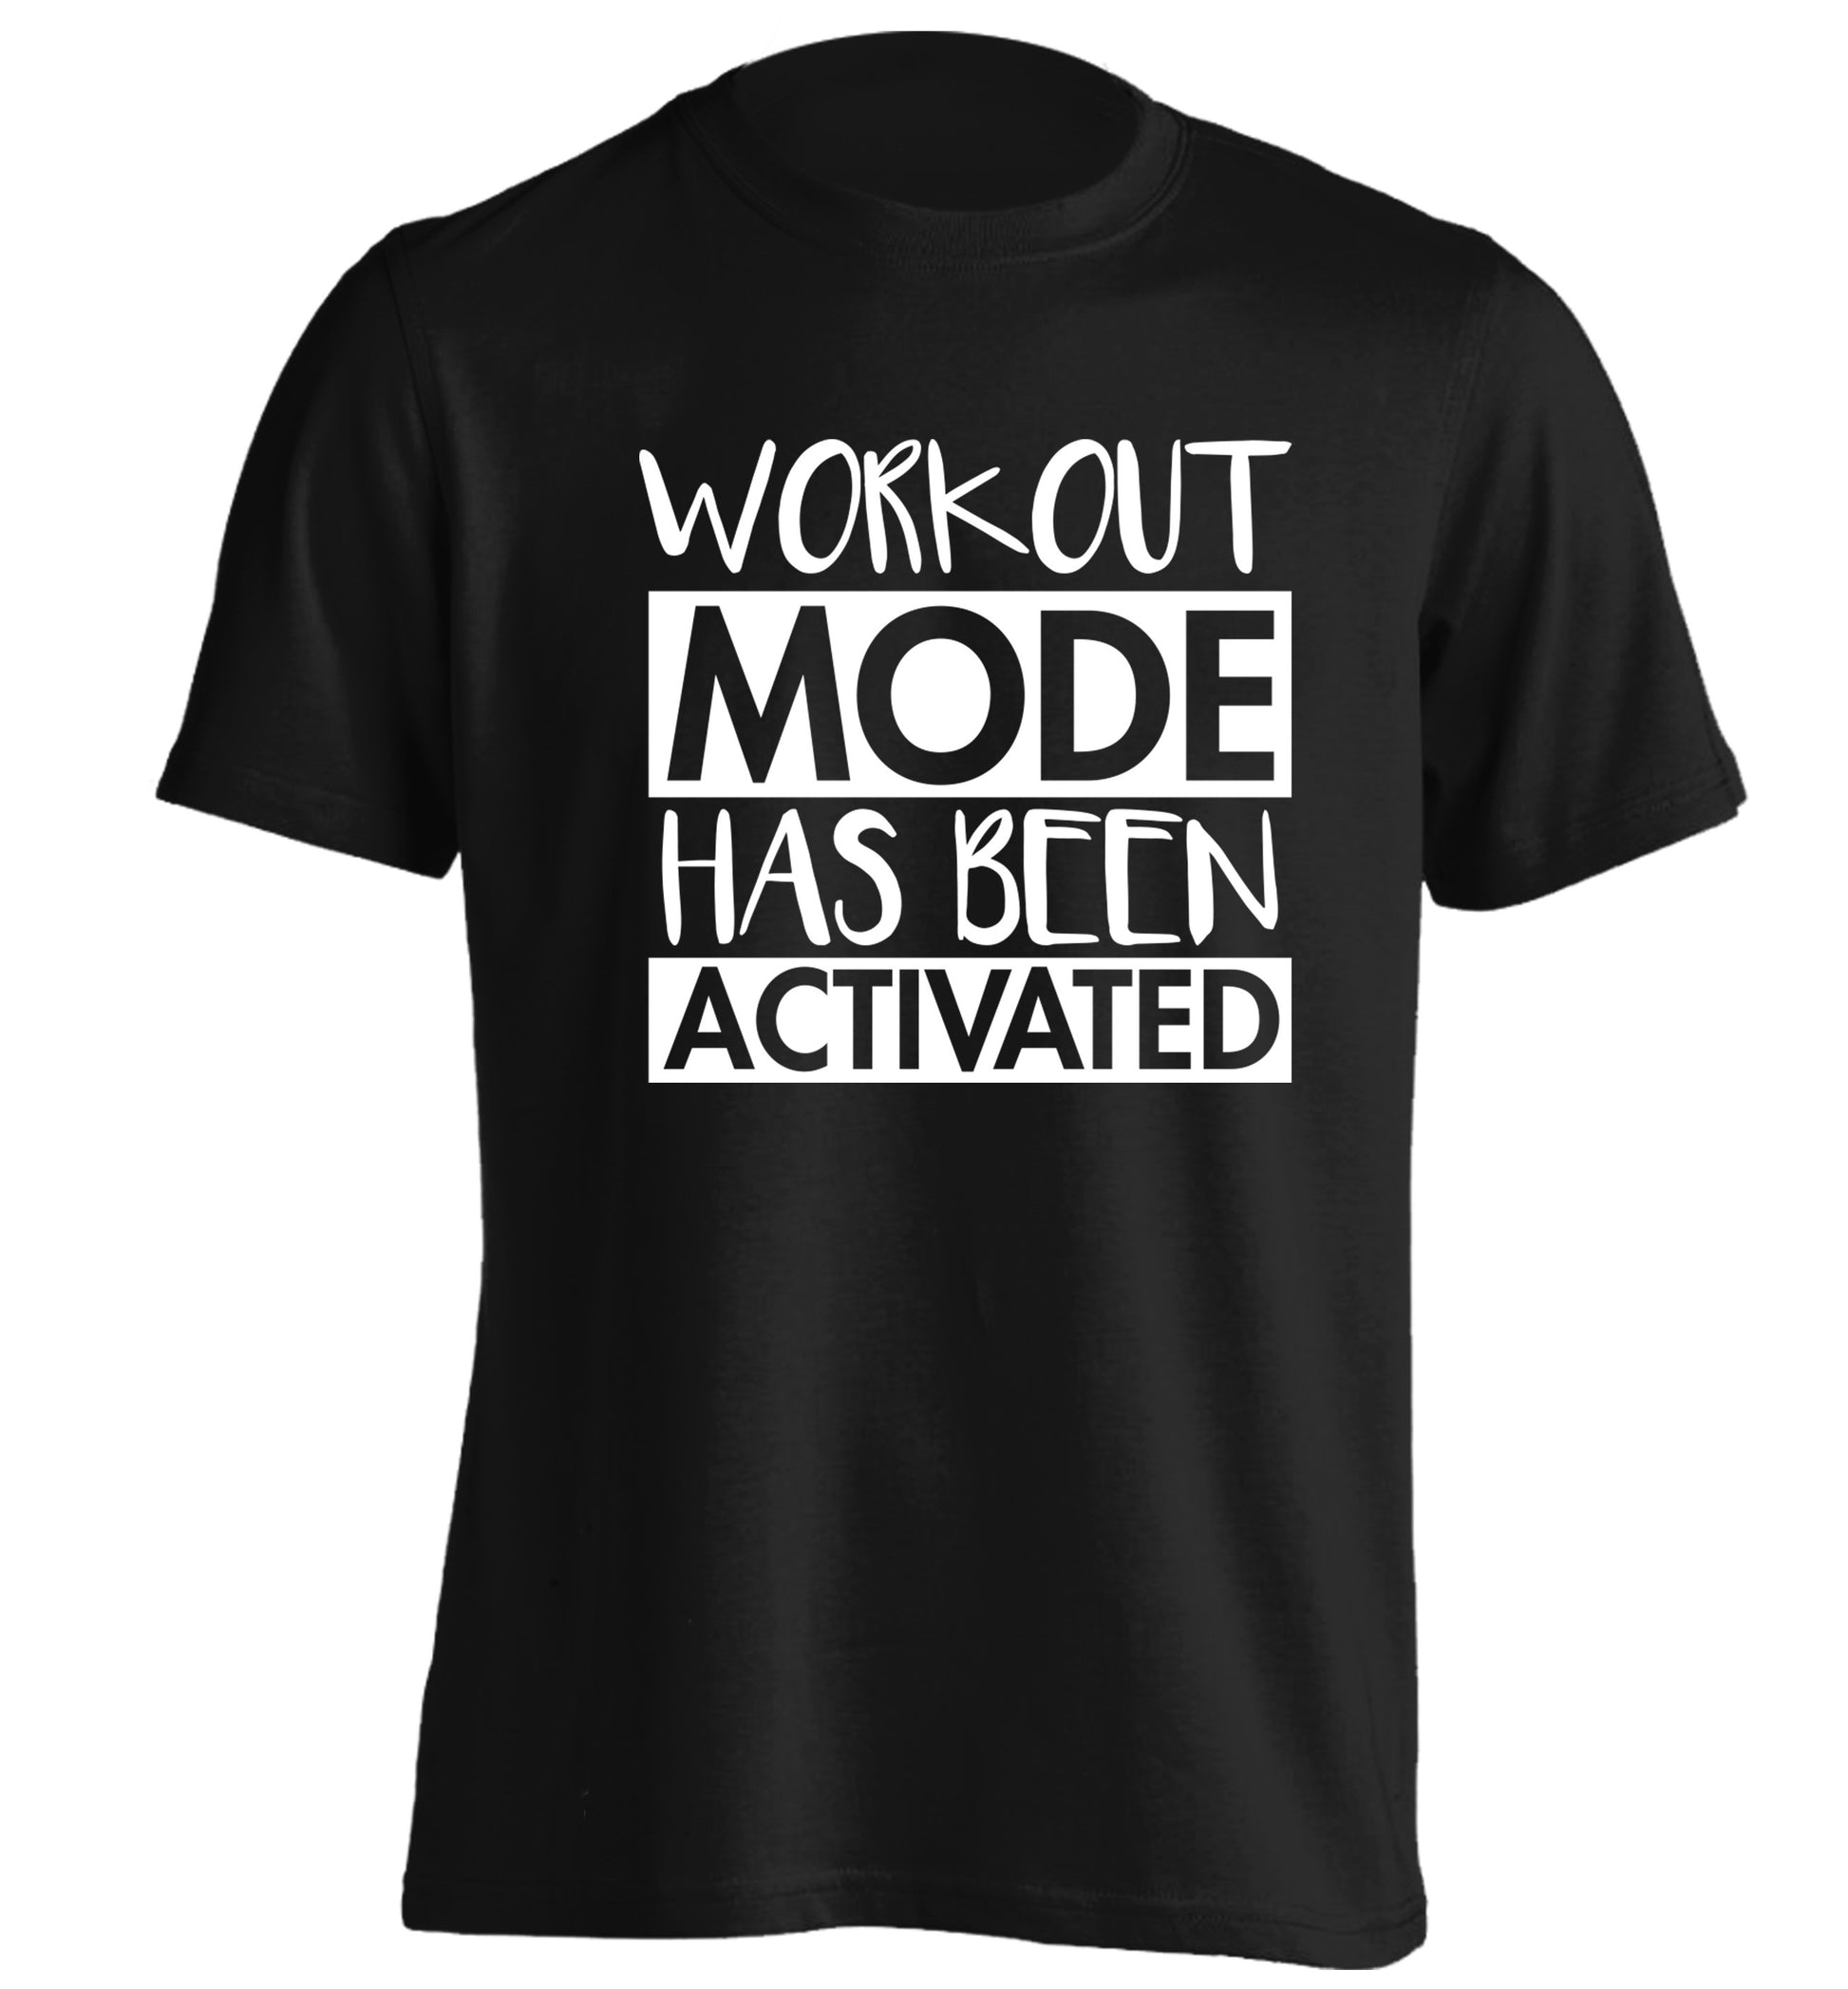 Workout mode has been activated adults unisex black Tshirt 2XL